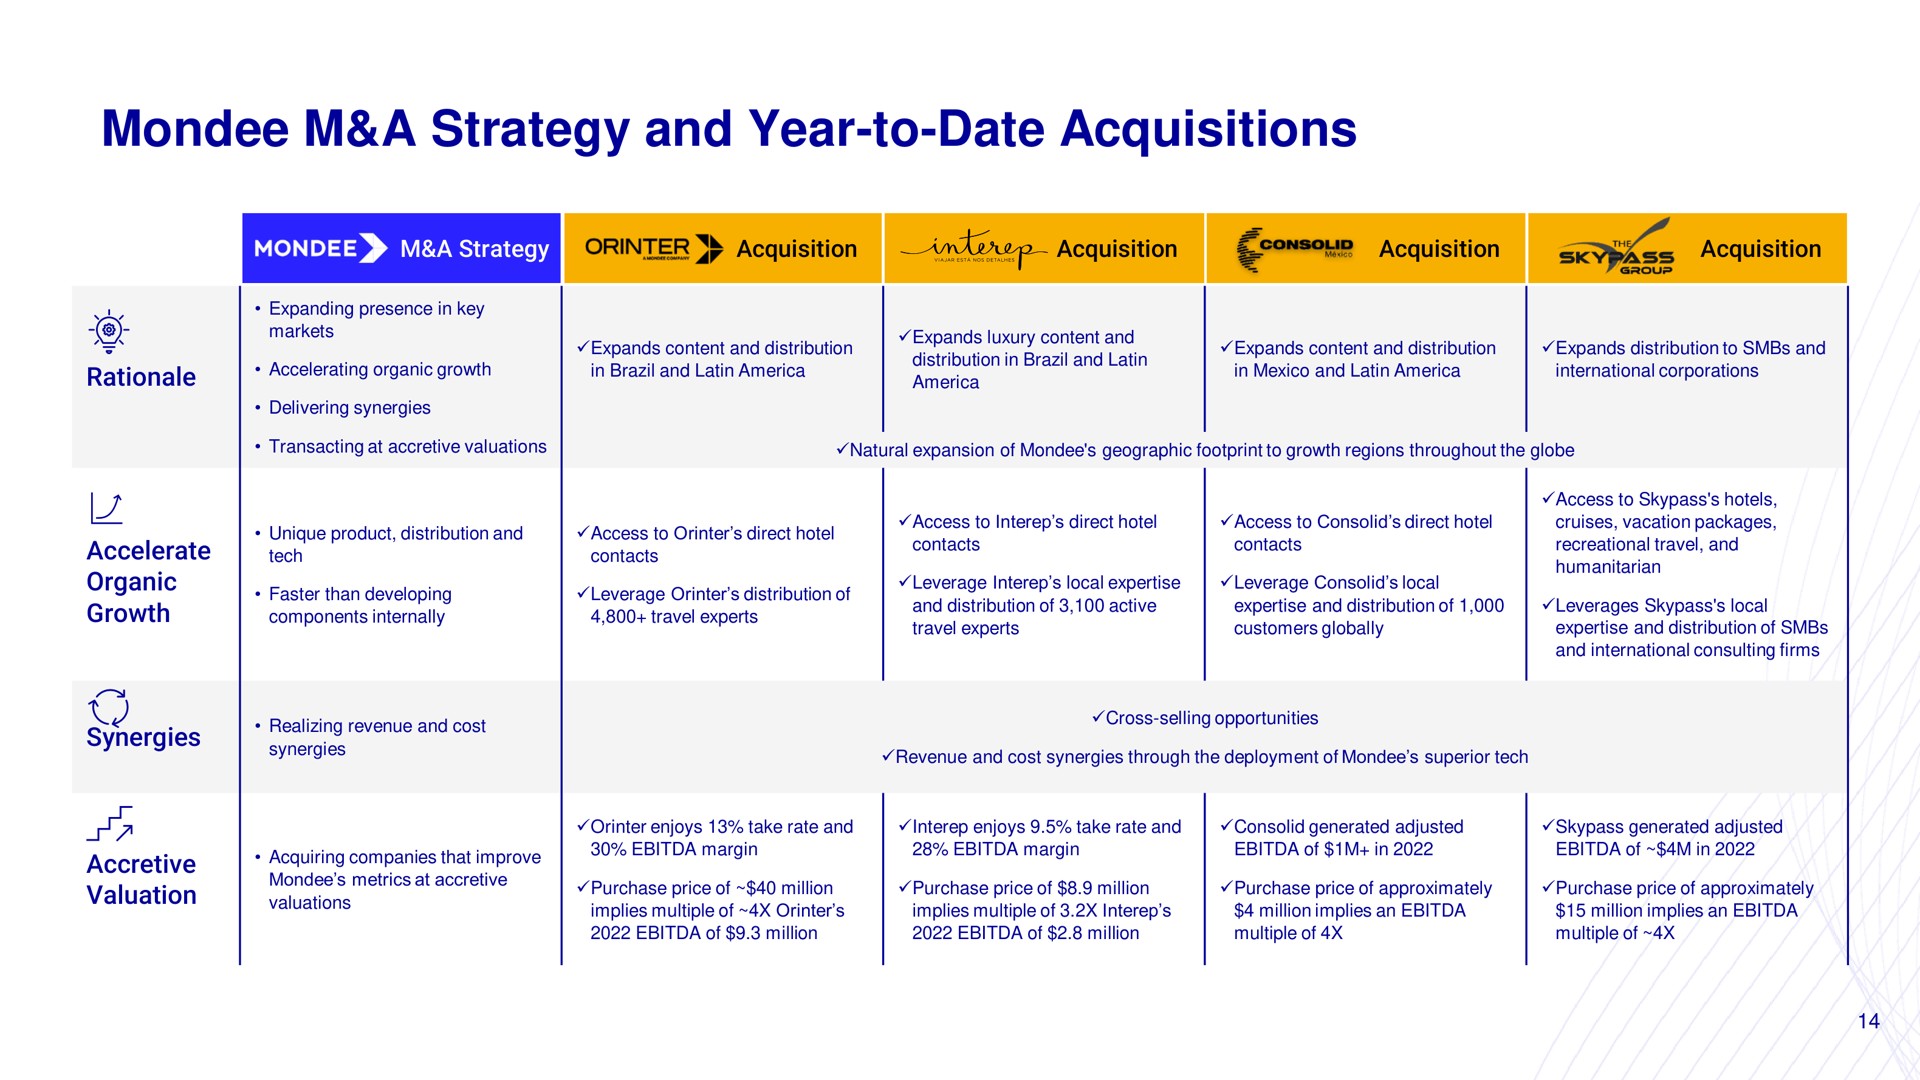 a strategy and year to date acquisitions growth caters toa spas | Mondee